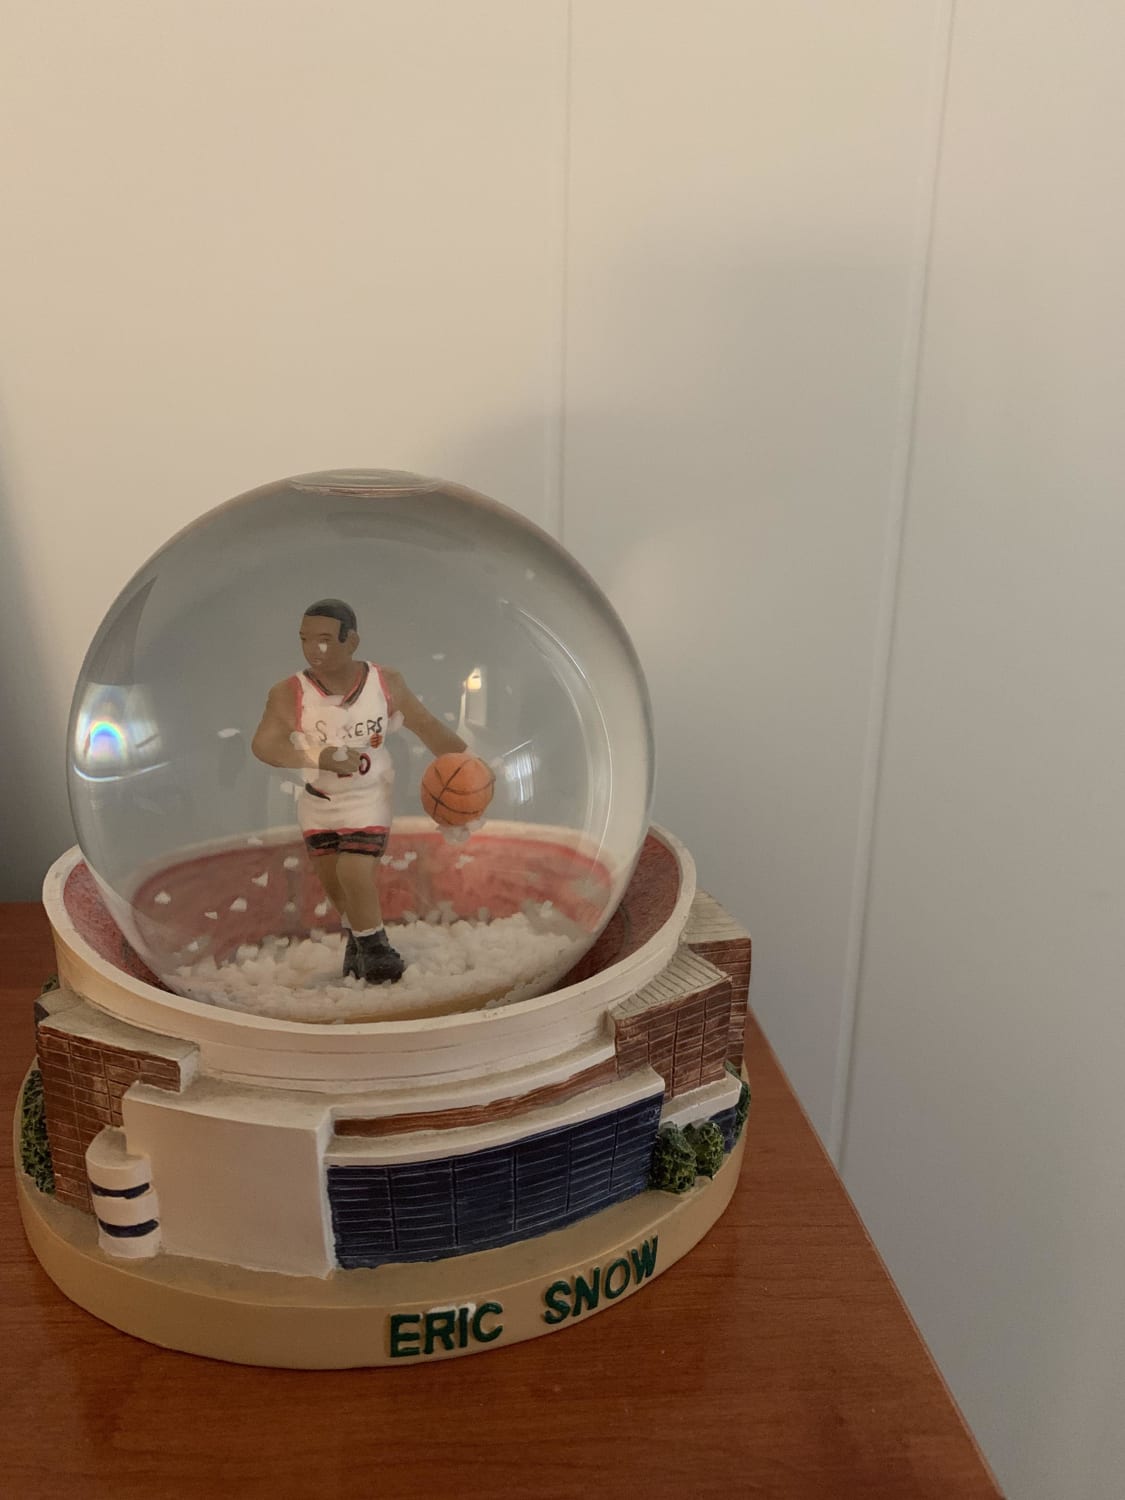 Eric snow globe. Any of y’all remember this?